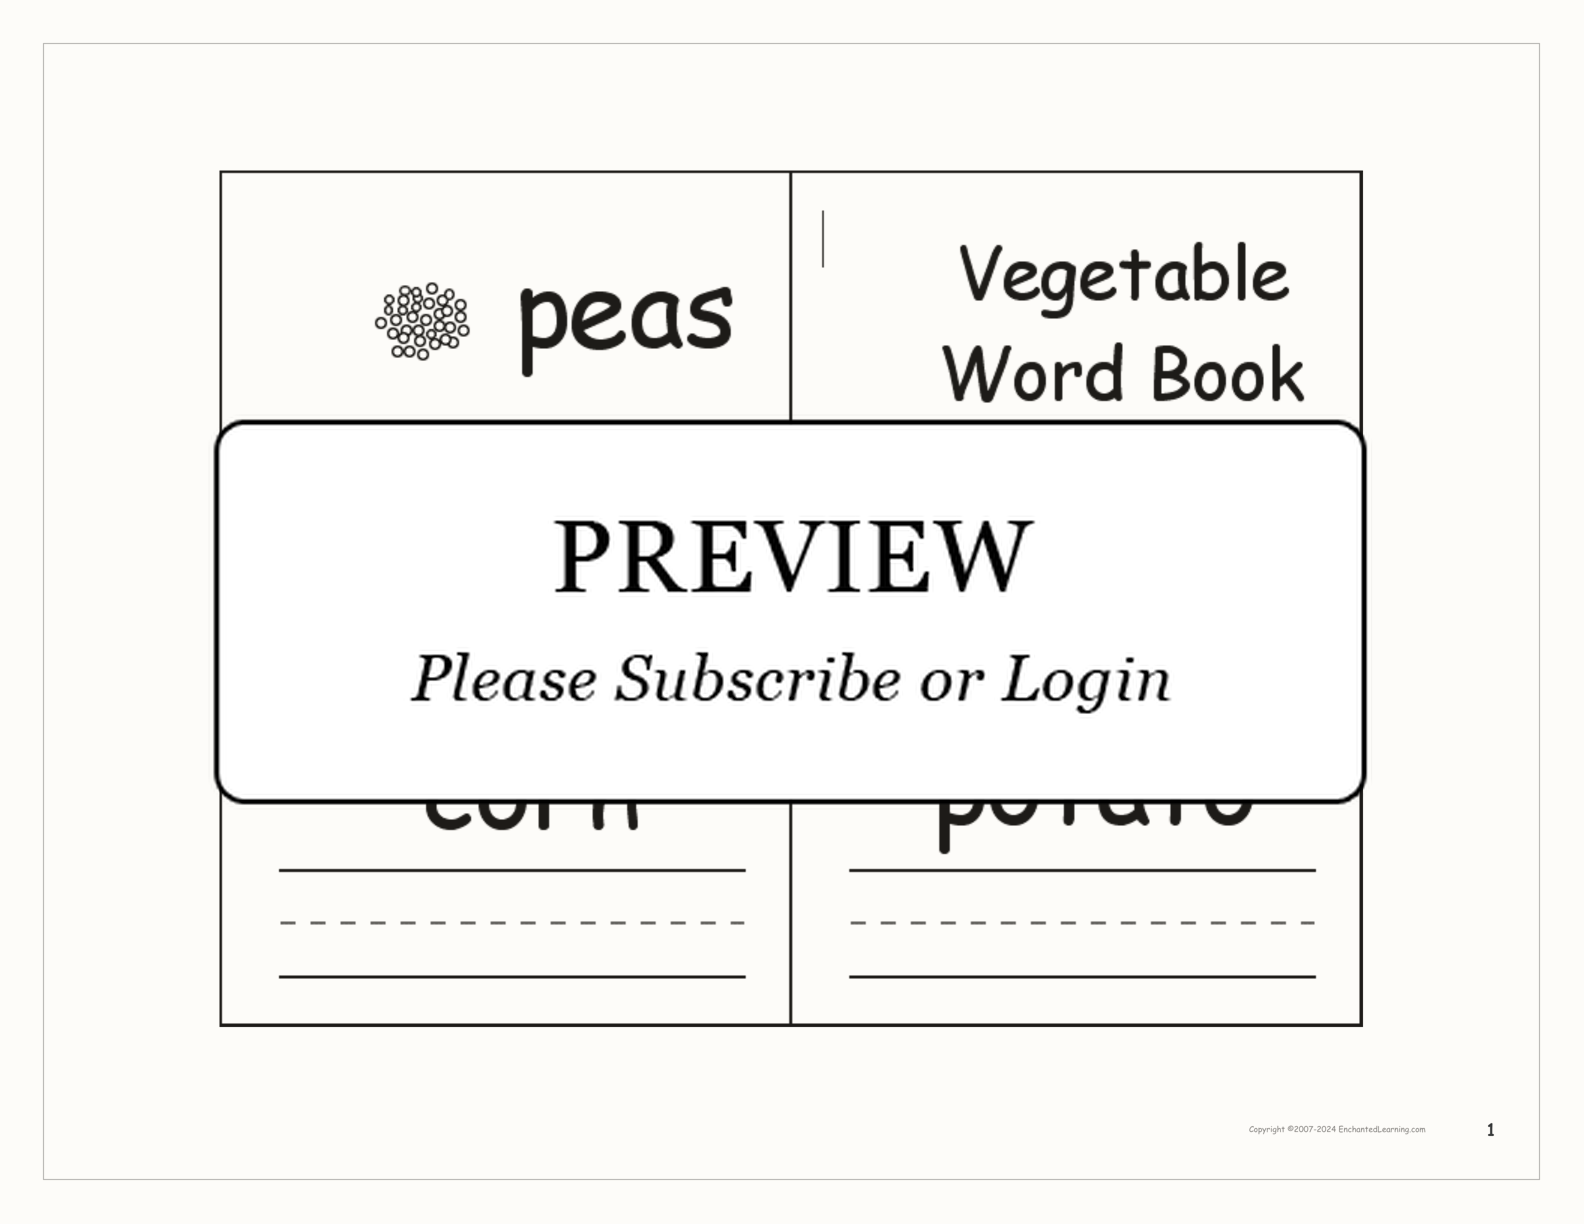 Vegetable Word Book interactive printout page 1